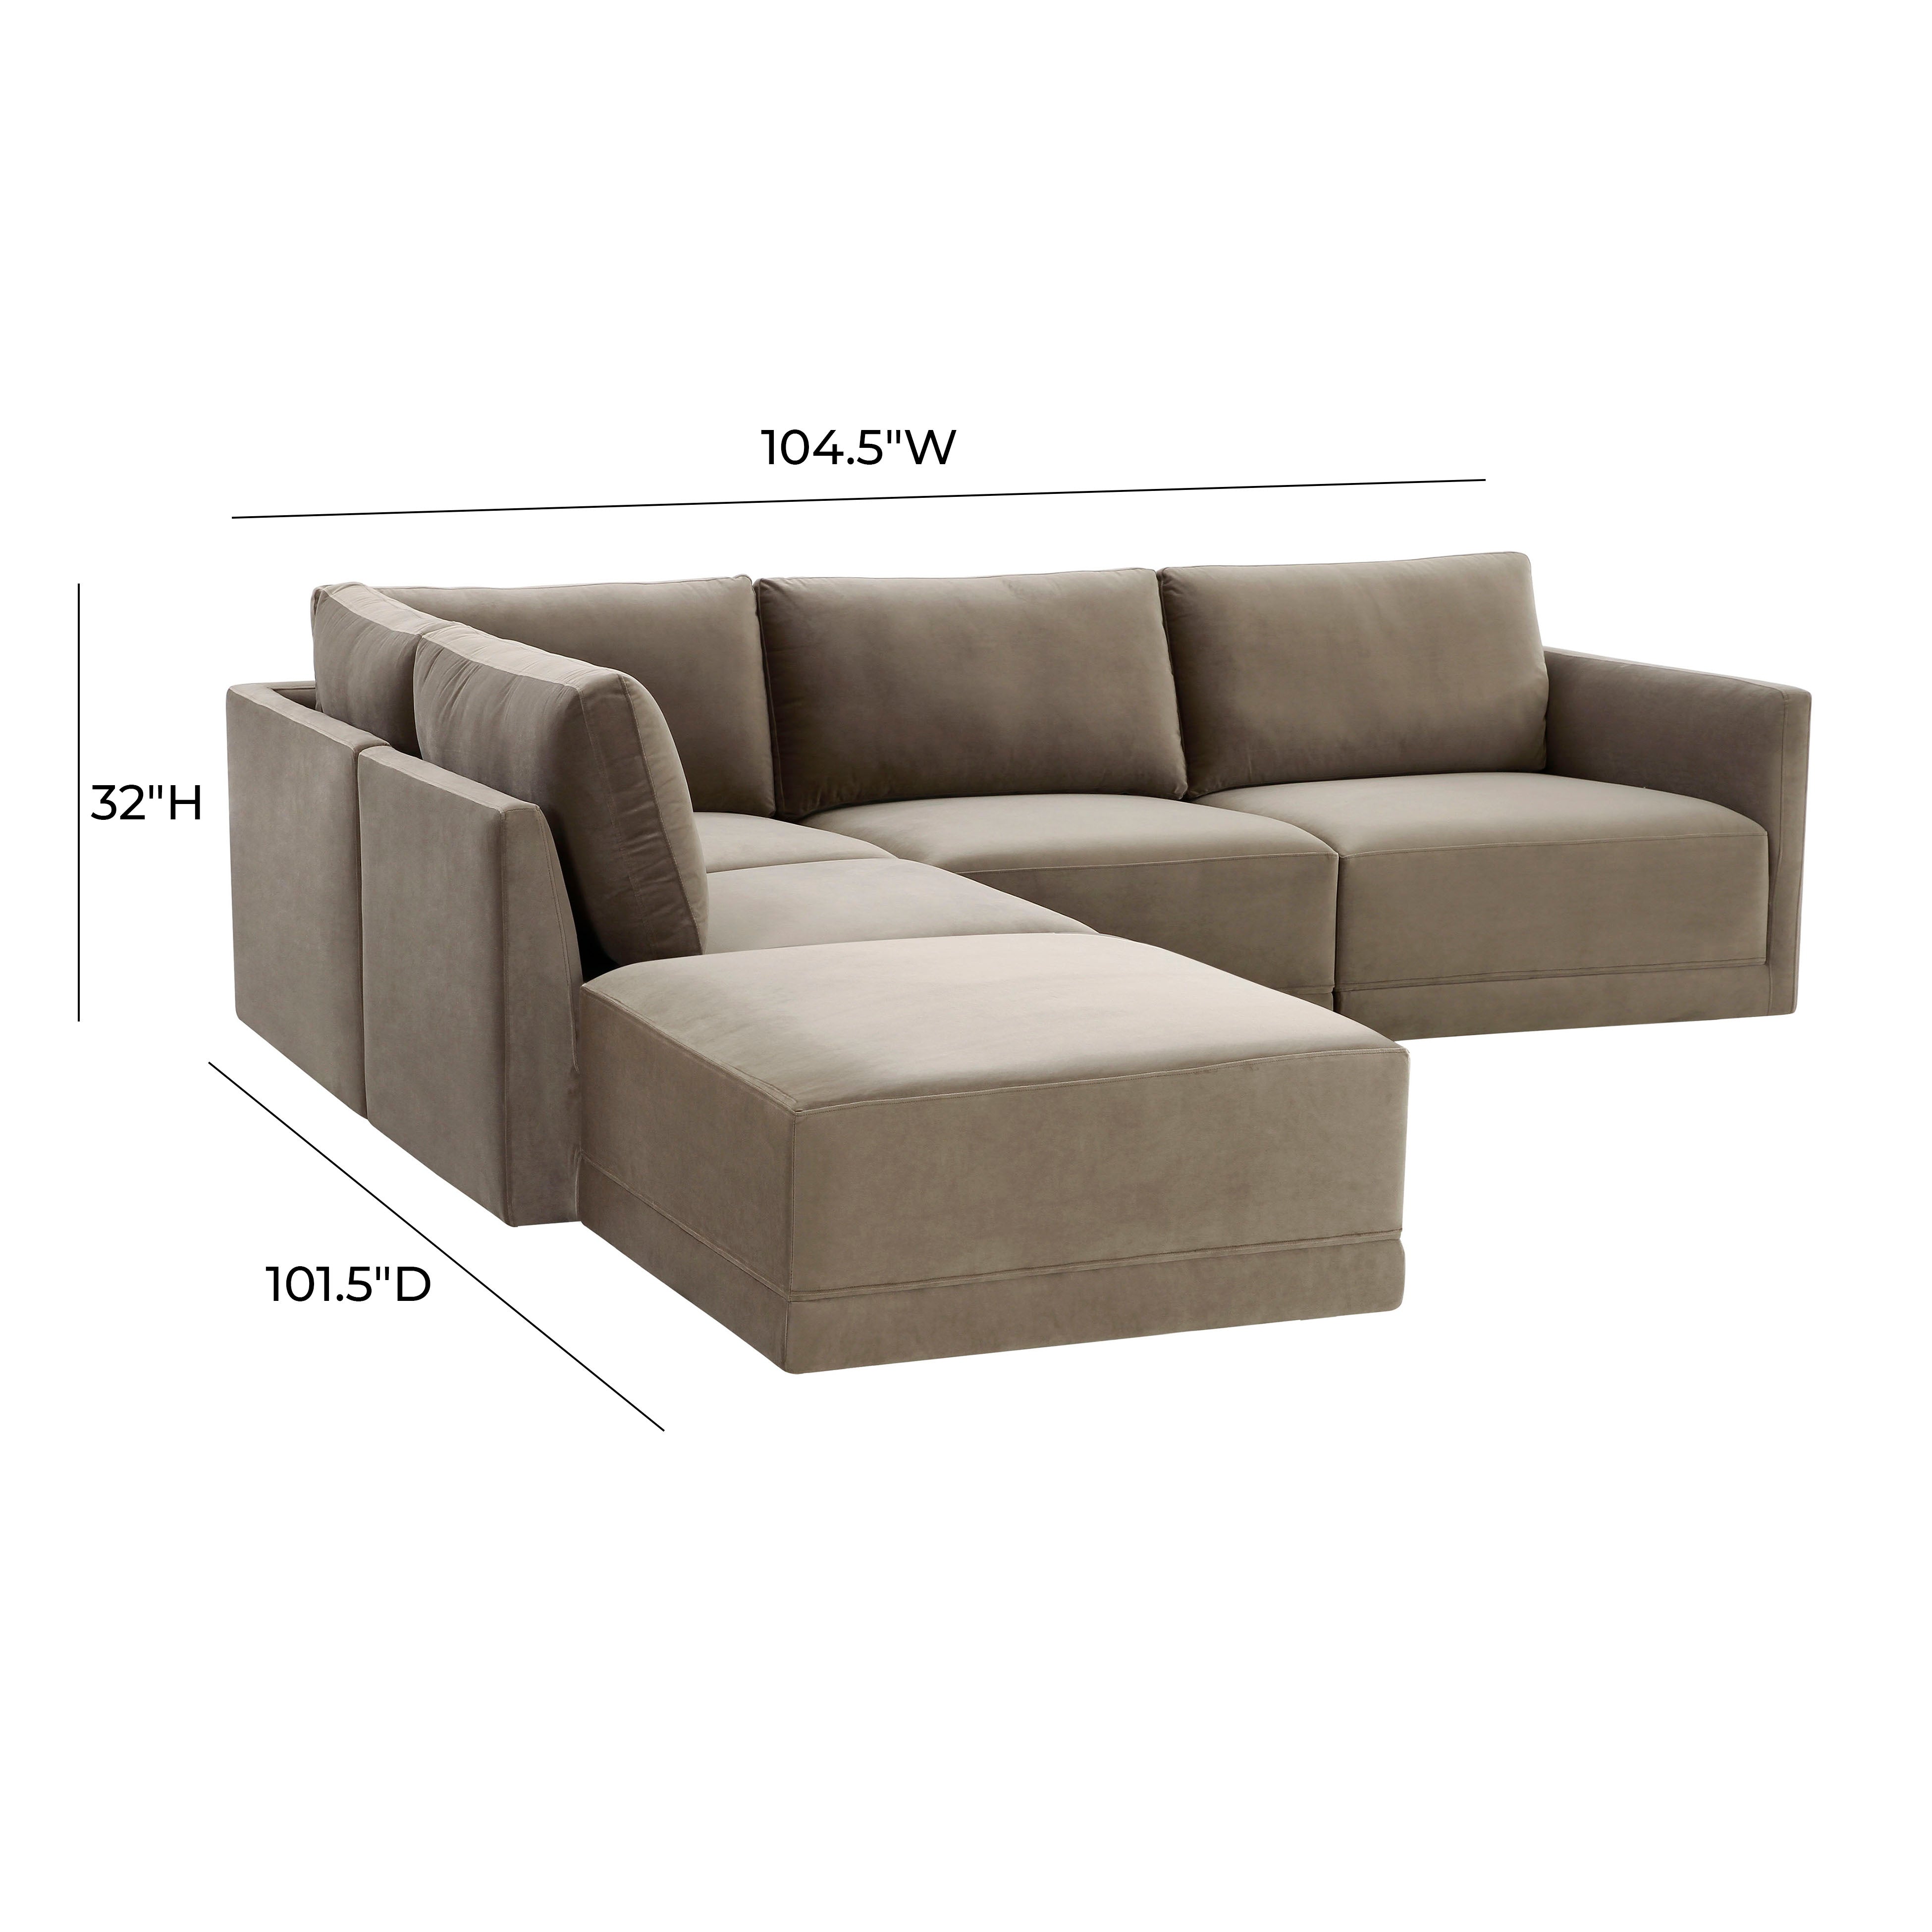 WILLOW TAUPE MODULAR 7 PIECE LARGE CHAISE SECTIONAL